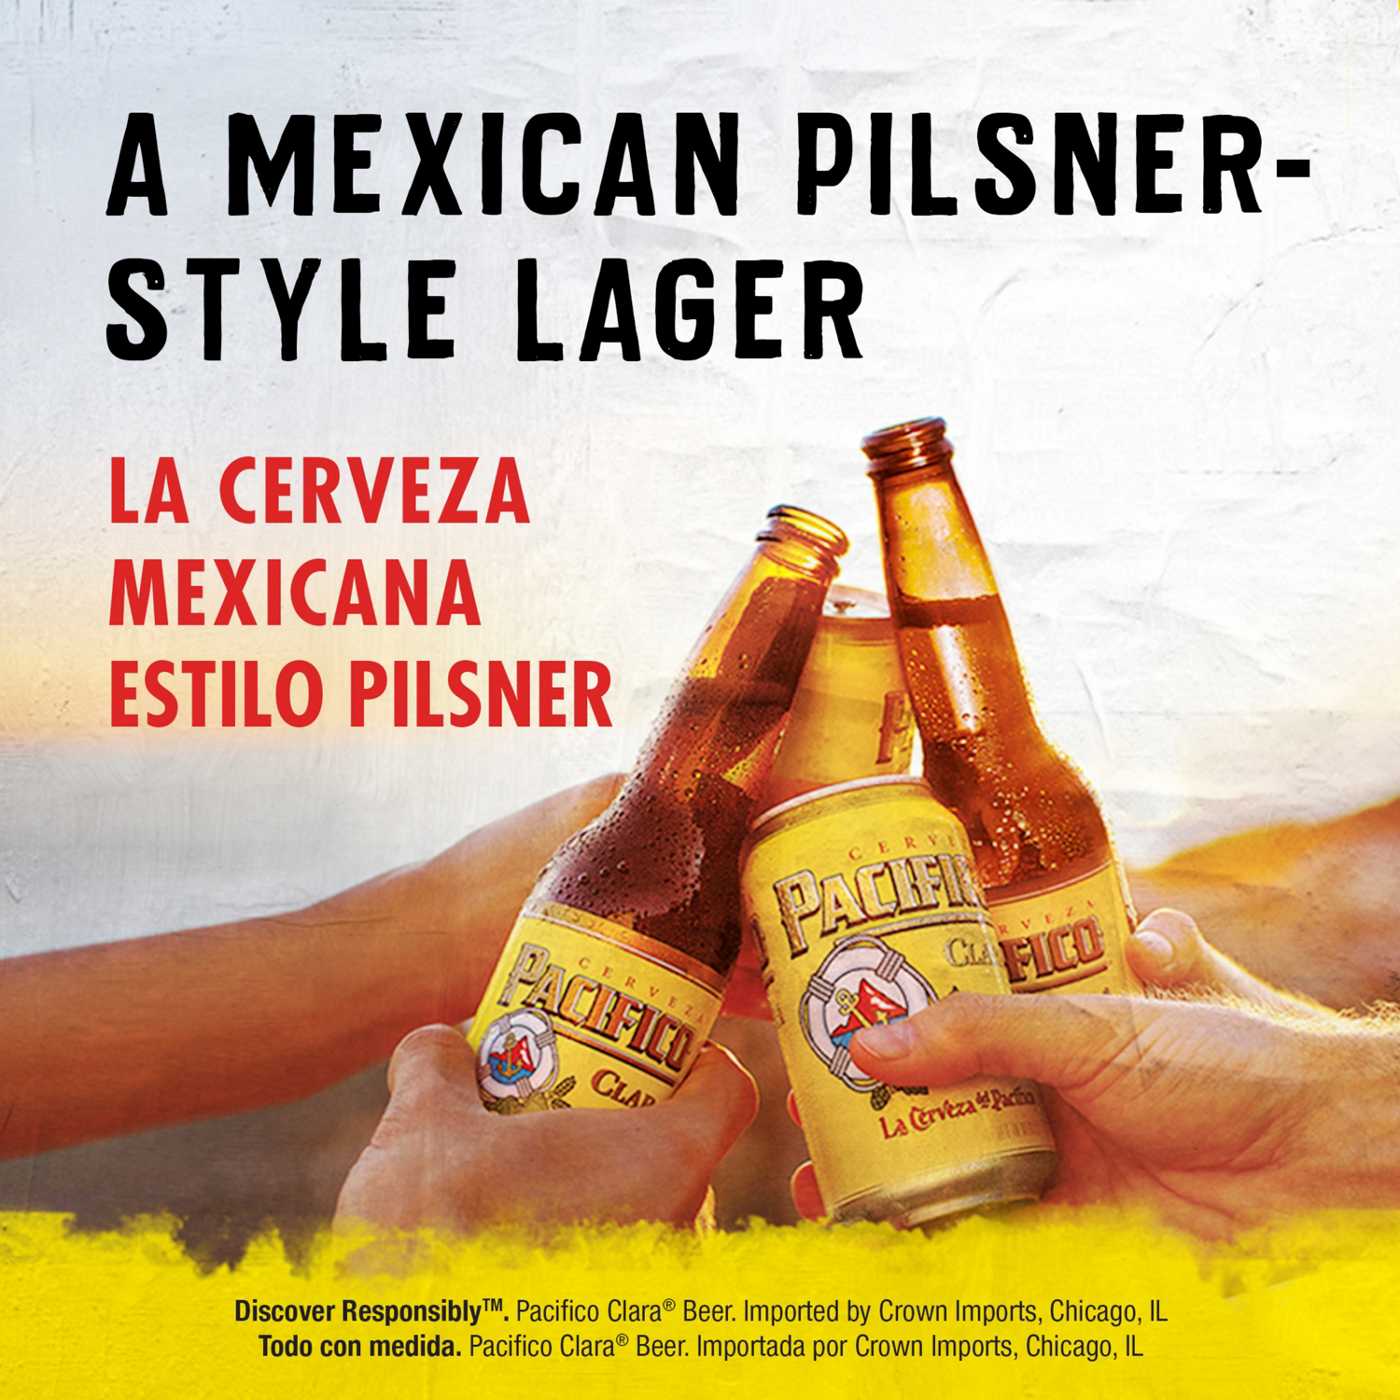 Pacifico Clara Mexican Lager Import Beer 12 oz Bottles, 12 pk; image 7 of 10